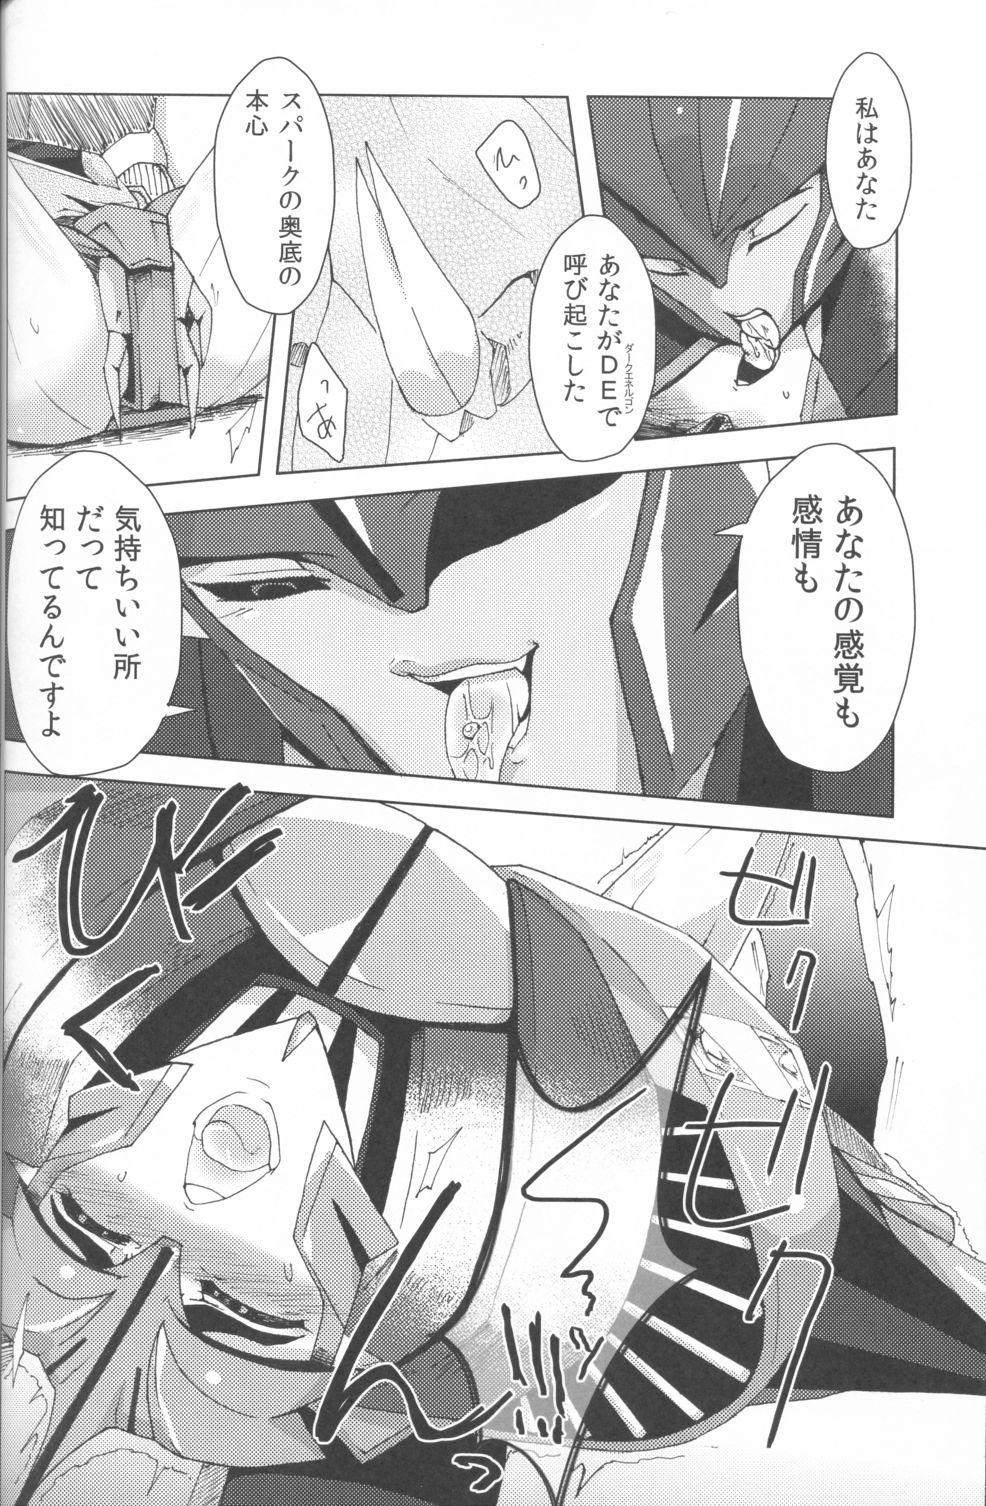 Skirt Knock x Knock - Transformers Pussy Licking - Page 11